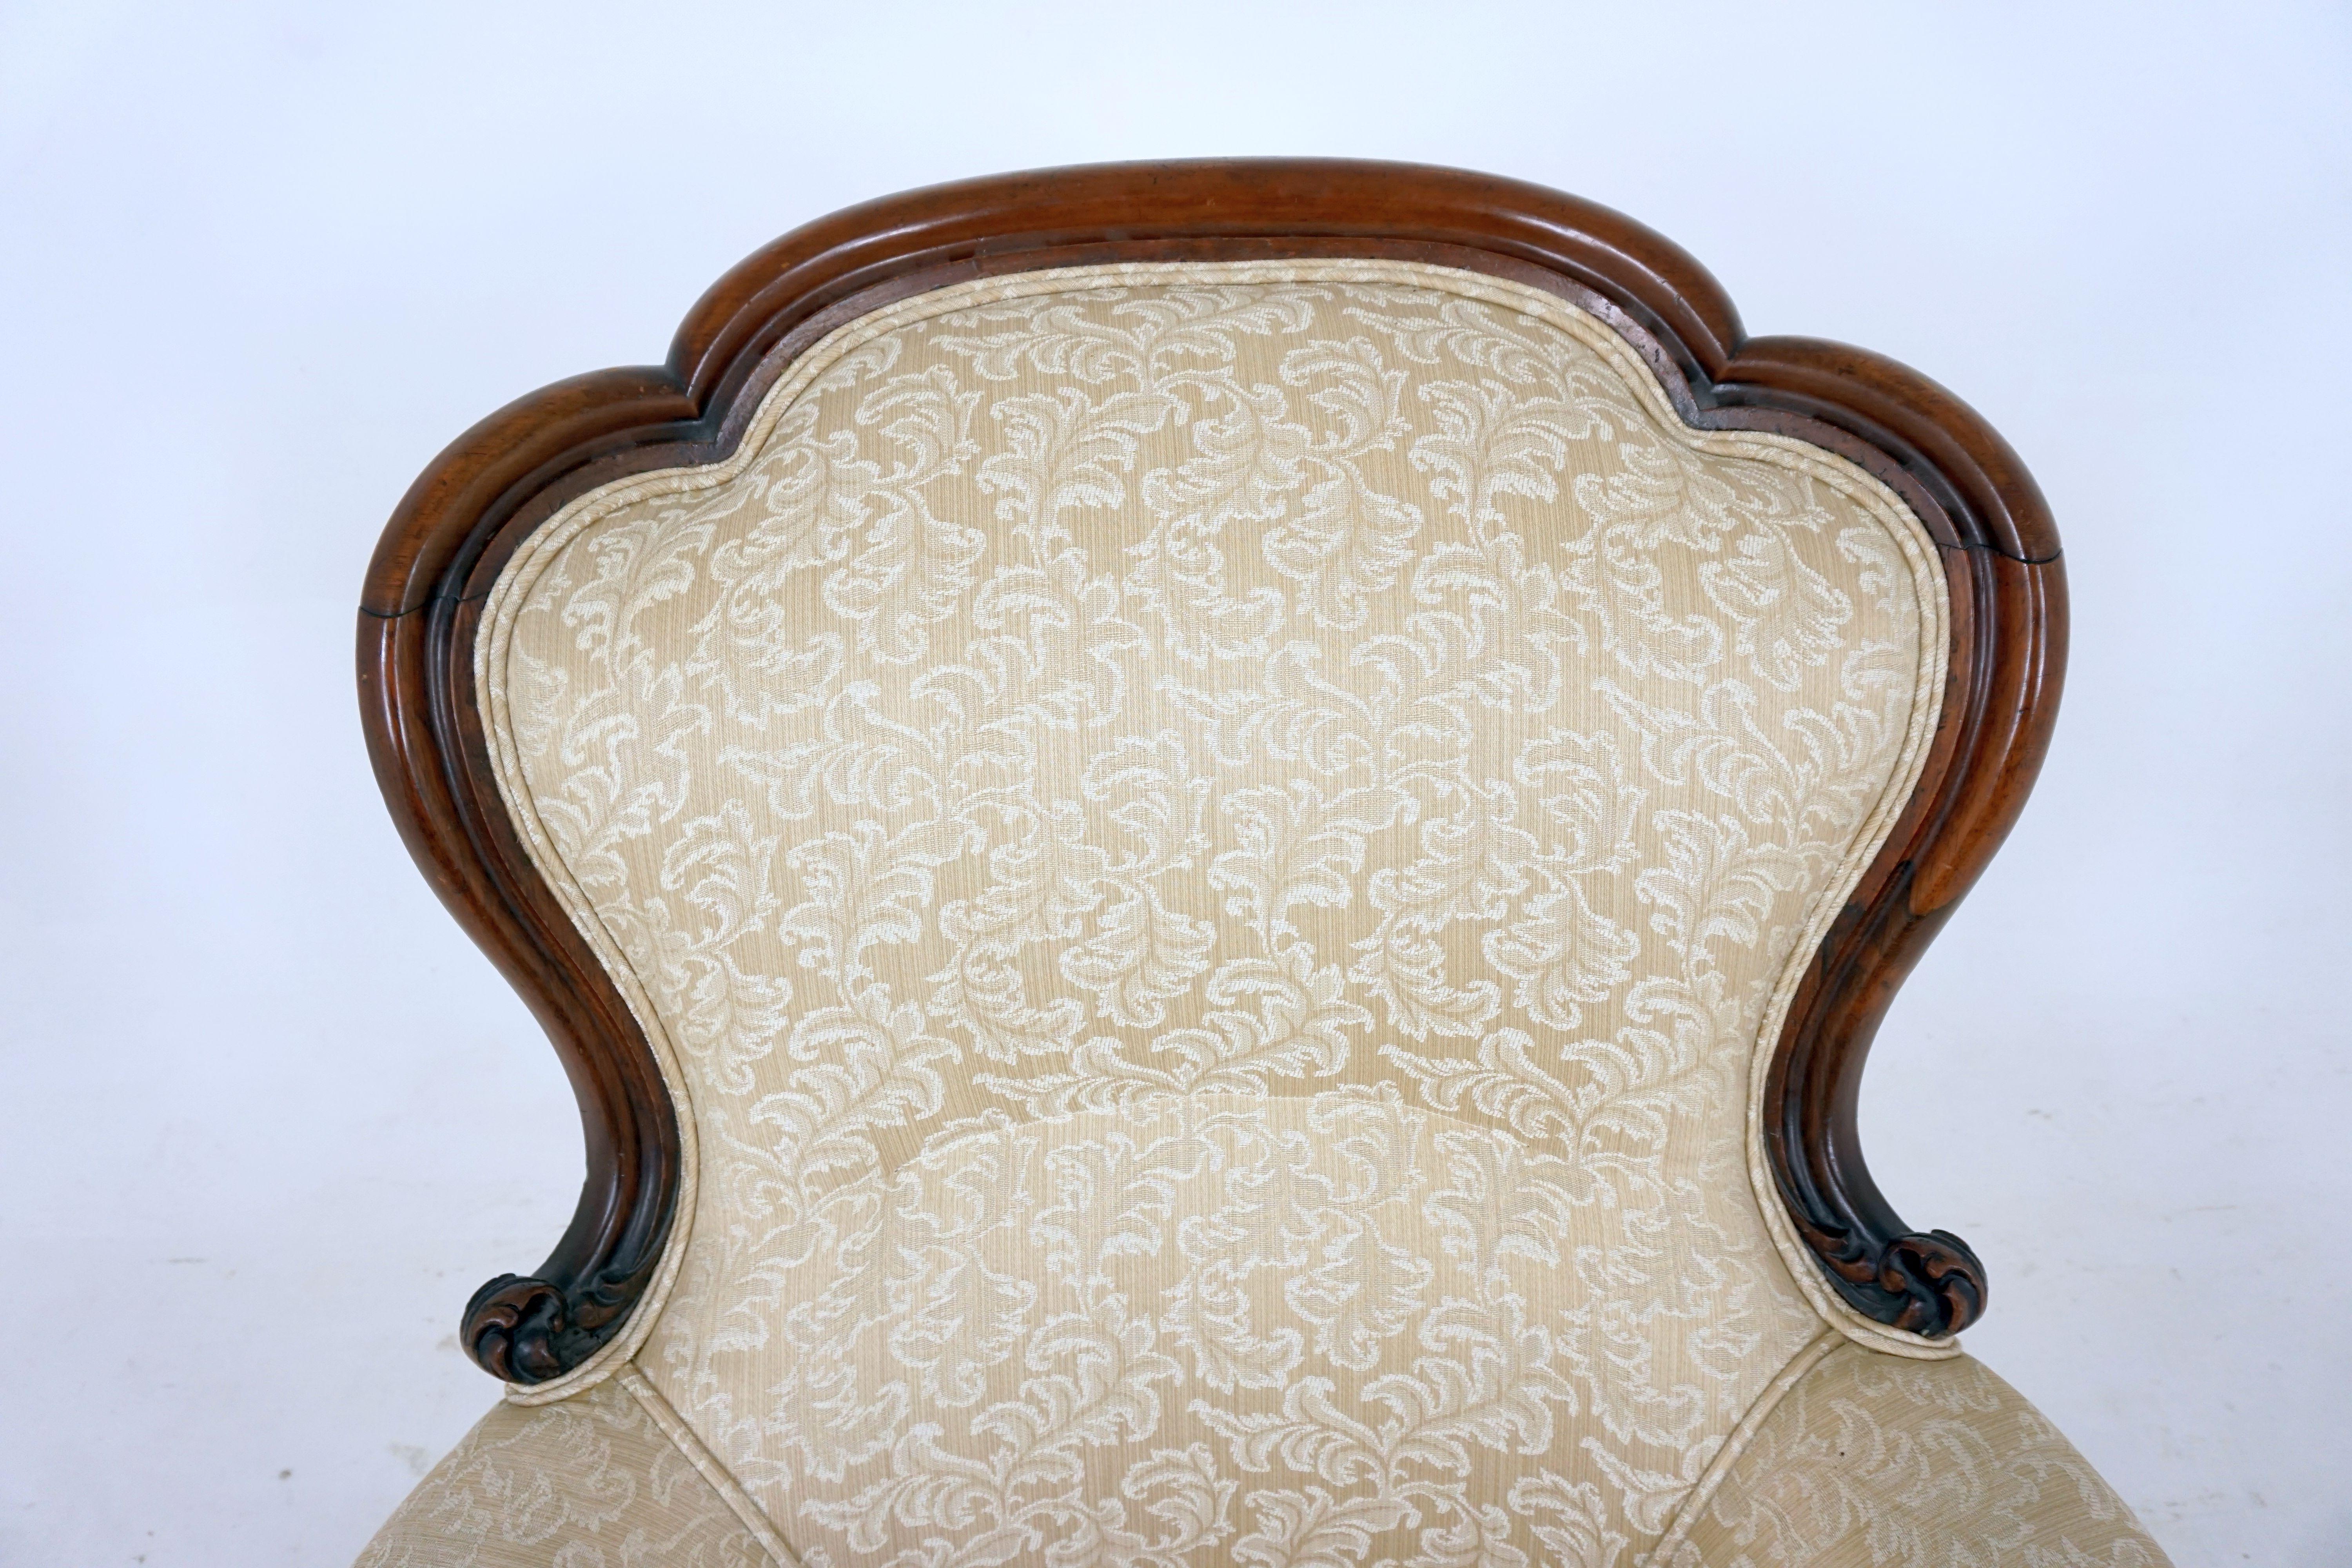 Antique Victorian Chair, Mahogany Gents Framed Spoon Back Chair, Scotland 1880, B2082

Scotland 1880
Solid Mahogany
Original Finish To The Wood
Upholstered Back And Seat
Carved Front To The Arms
Standing On Beautifully Carved Cabriole Legs